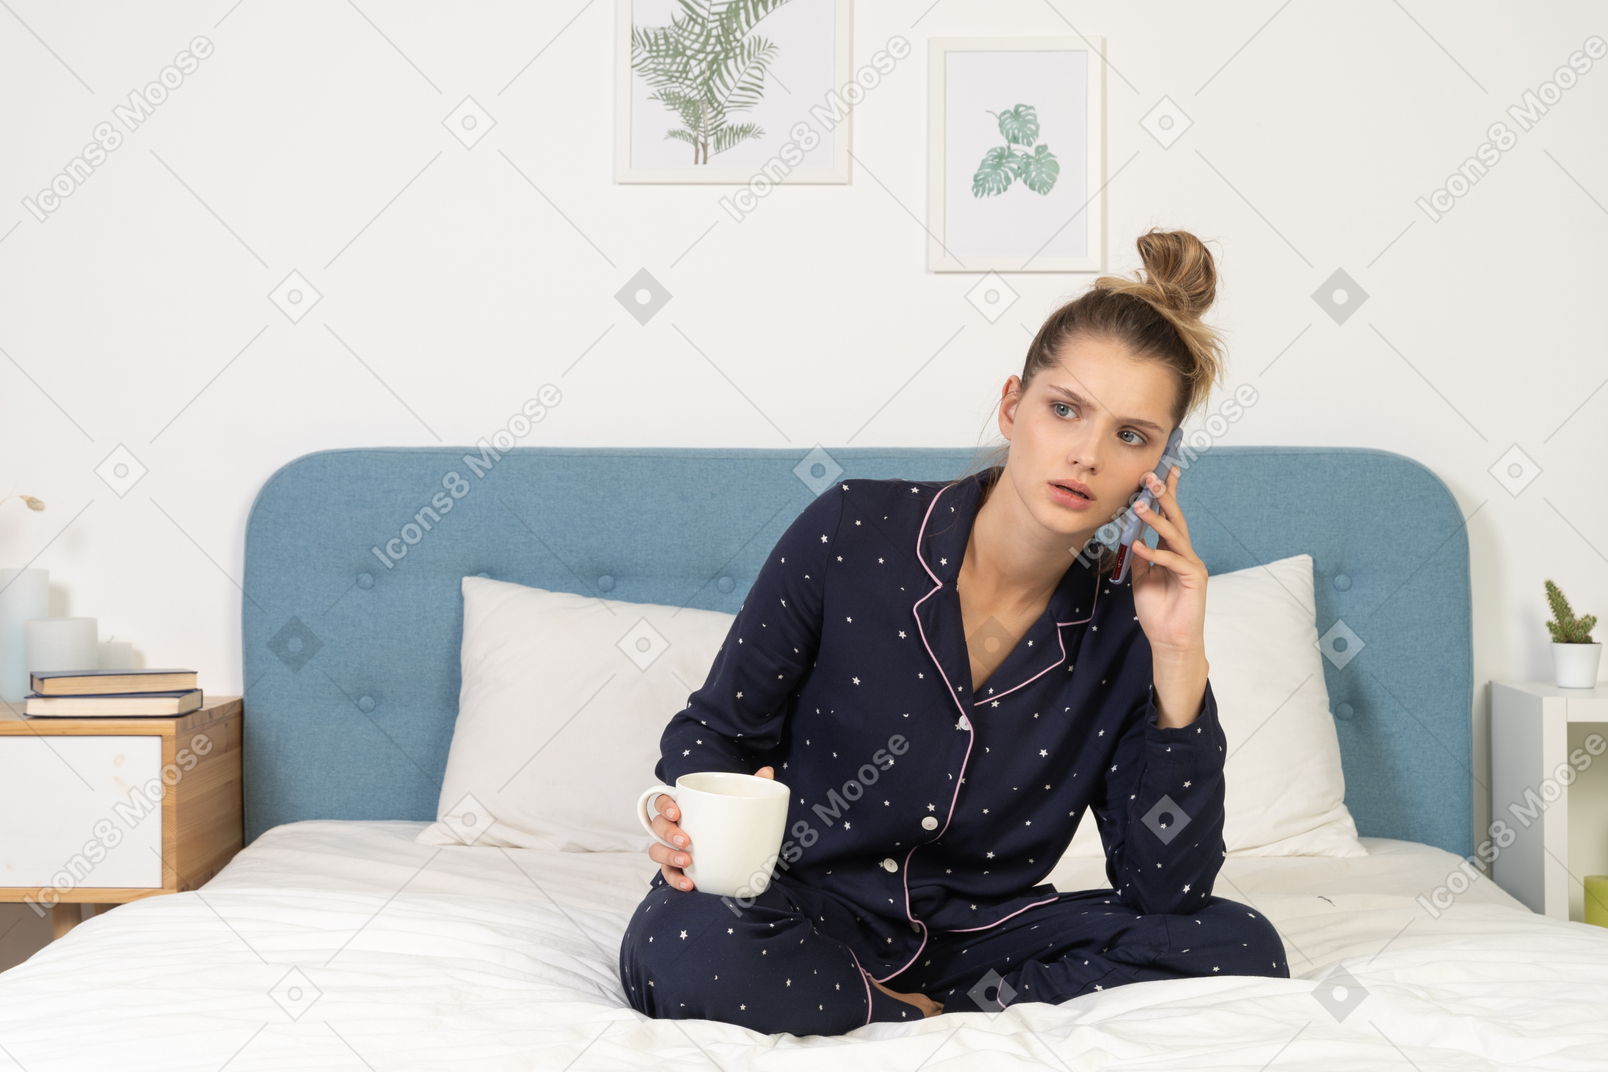 Front of a young perplexed female in pajama sitting in bed holding the cup and having a phone call